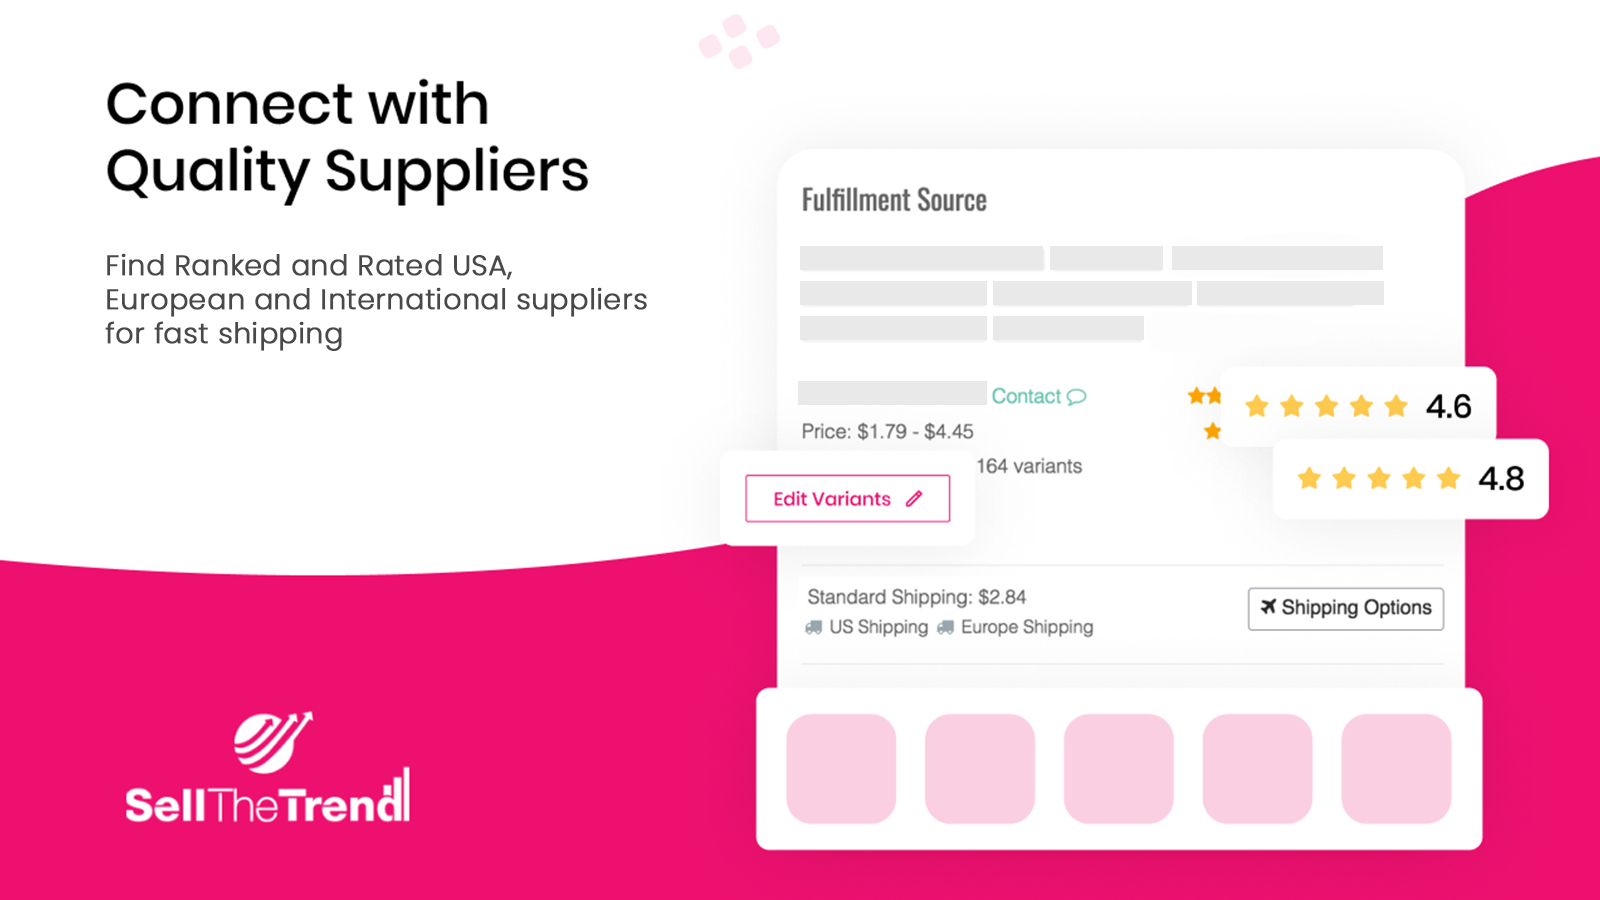 Connect with Ranked and Rated Suppliers